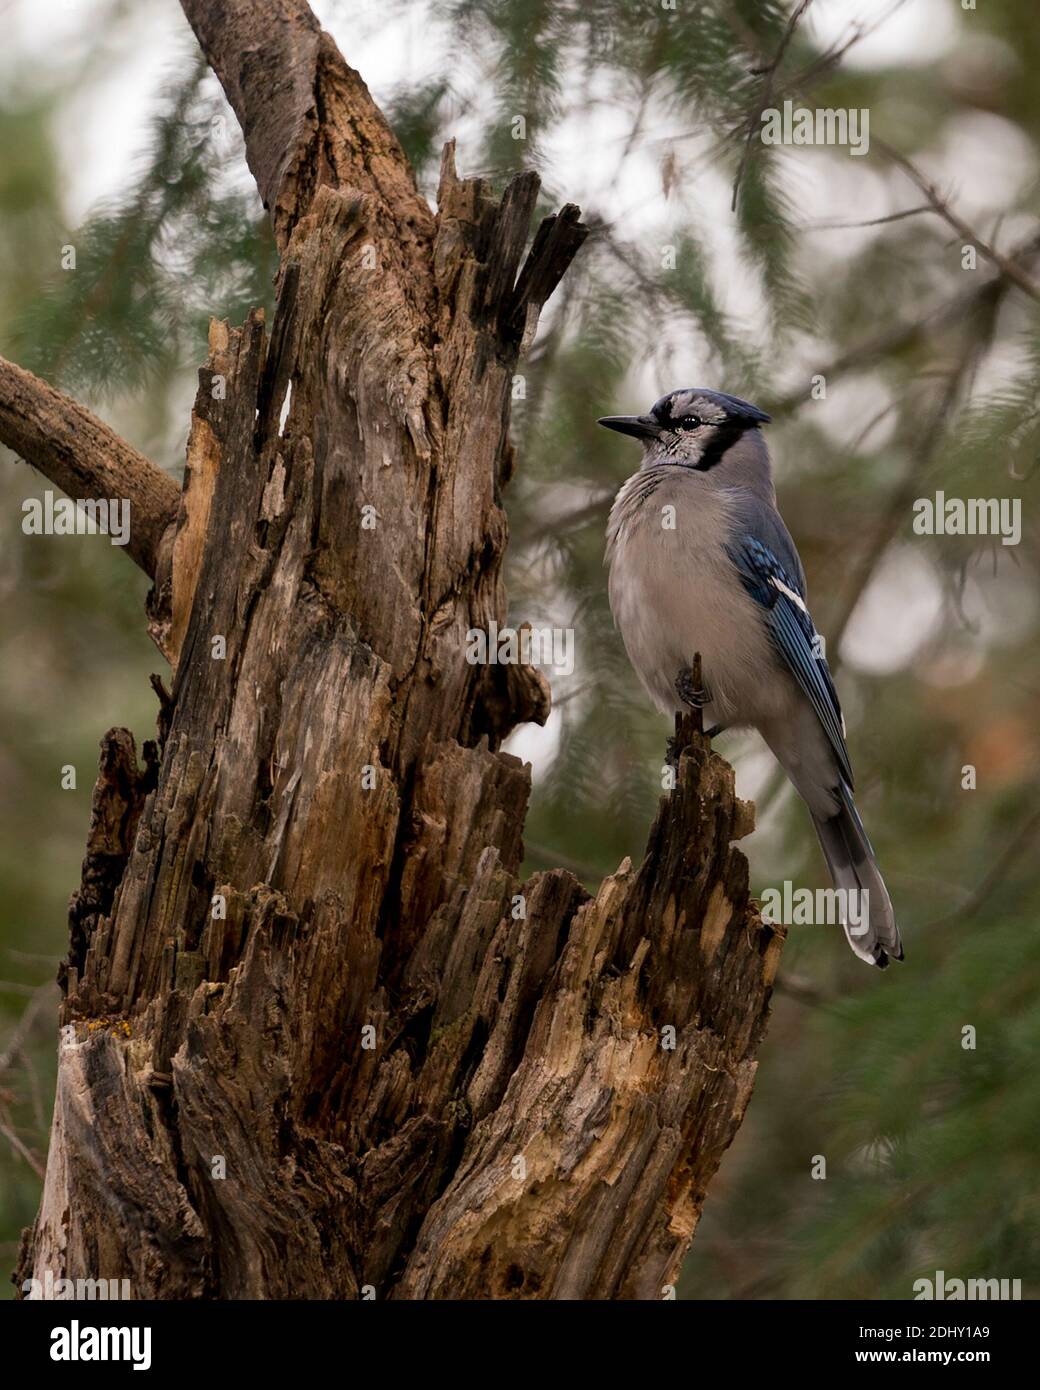 Blue Jay perched on a branch with a blur background in the forest environment and habitat. Stock Photo